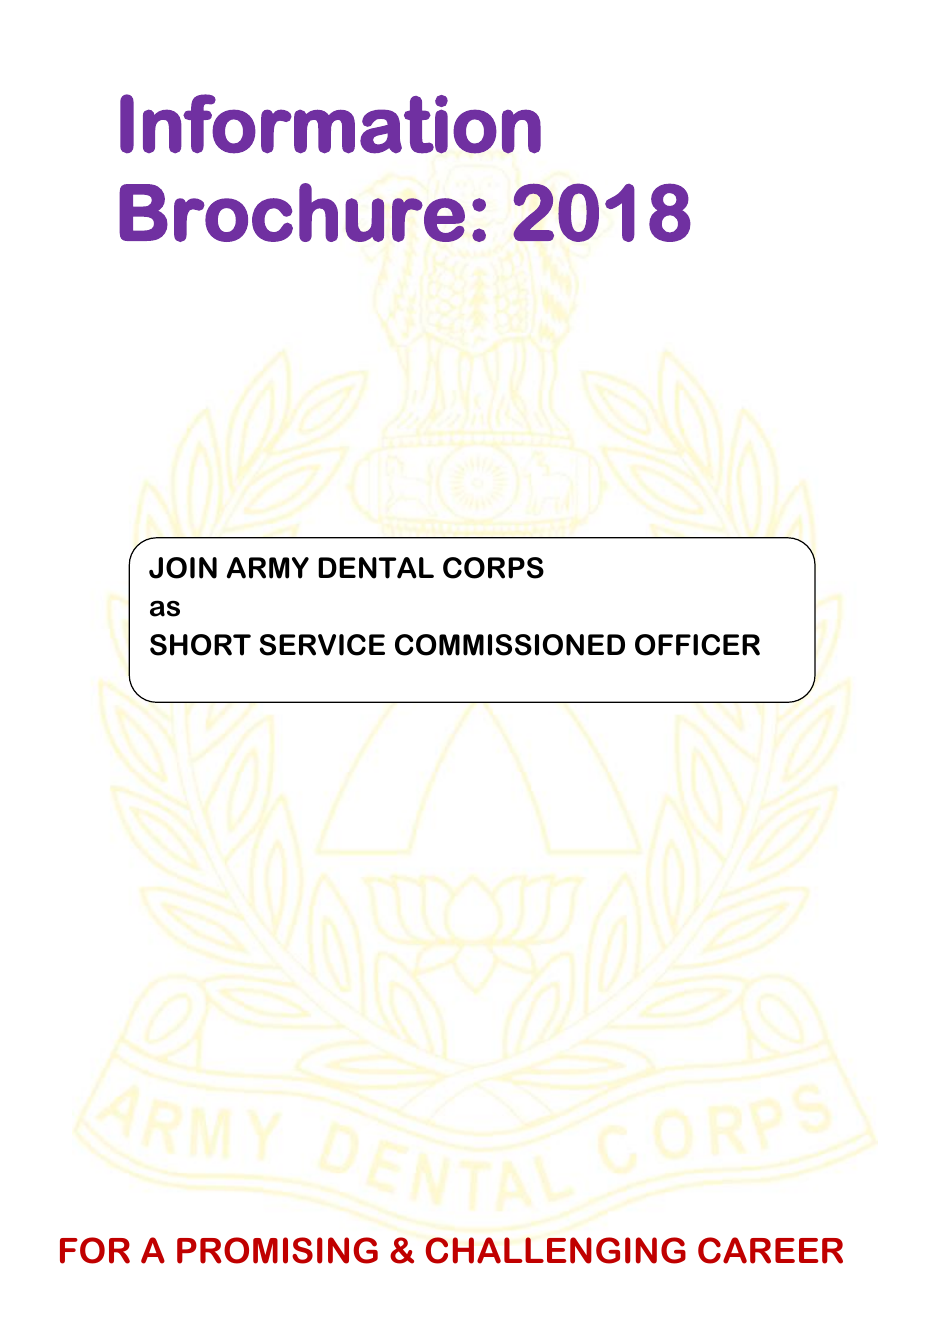 Application Form for Grant of Short Service Commission in Army Dental Corps - India, Page 1